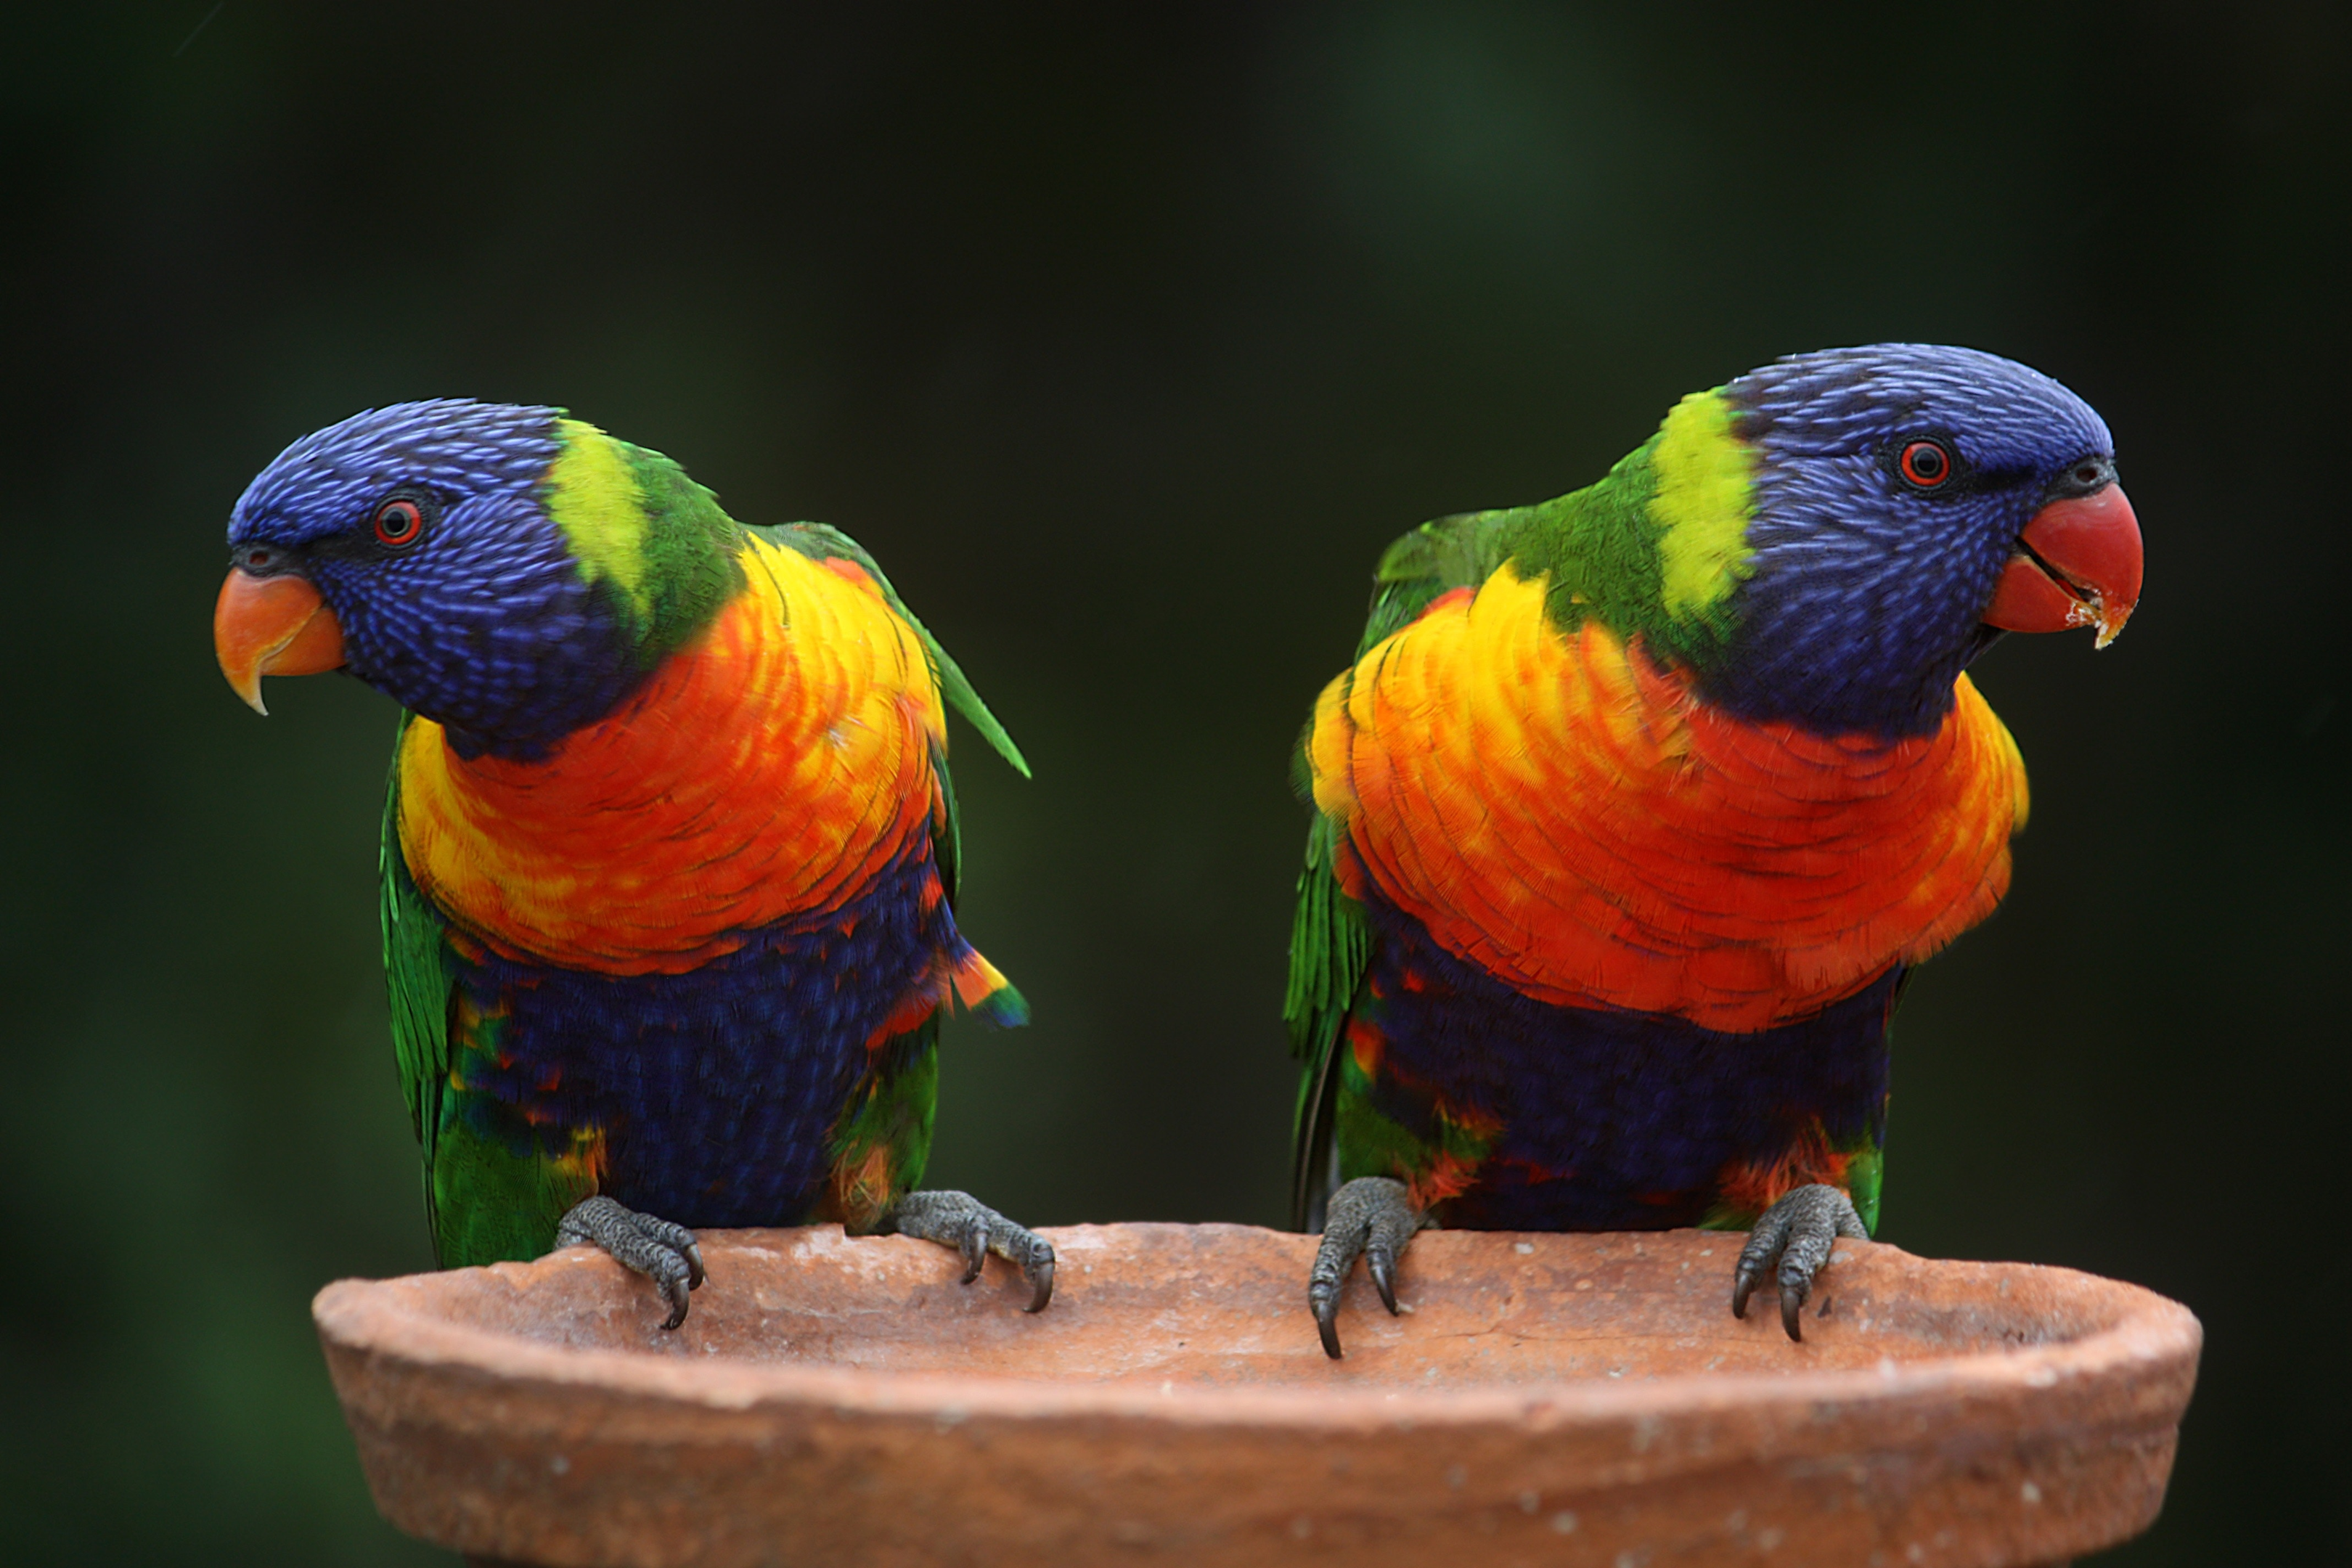 Lorikeets are Easy to Tame and Love Hand-feeding